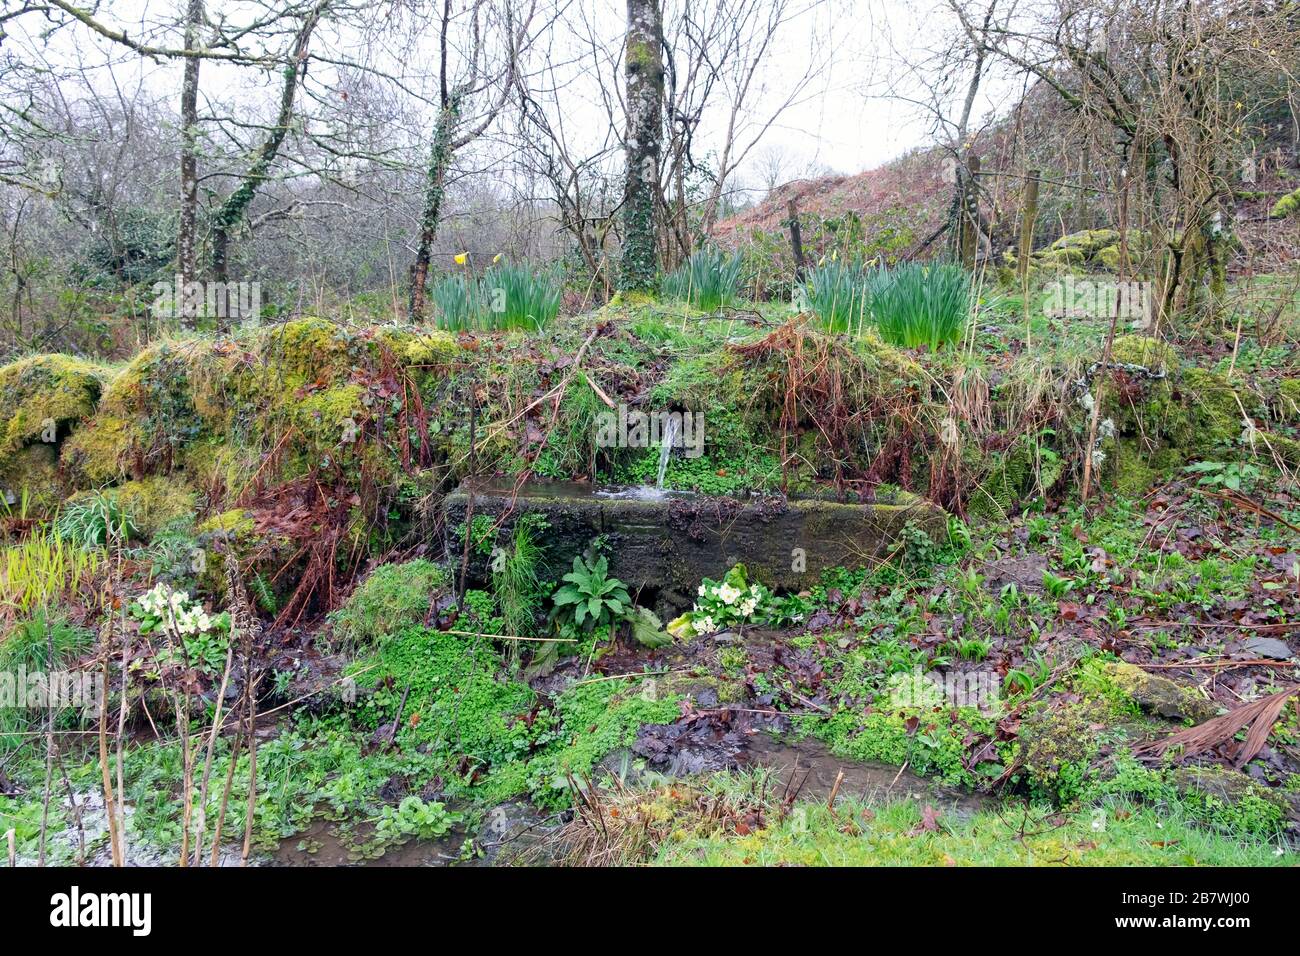 Stone water trough in a woodland garden with hostas, daffodils, primroses, spring bulbs and wild plants in Carmarthenshire Wales UK   KATHY DEWITT Stock Photo